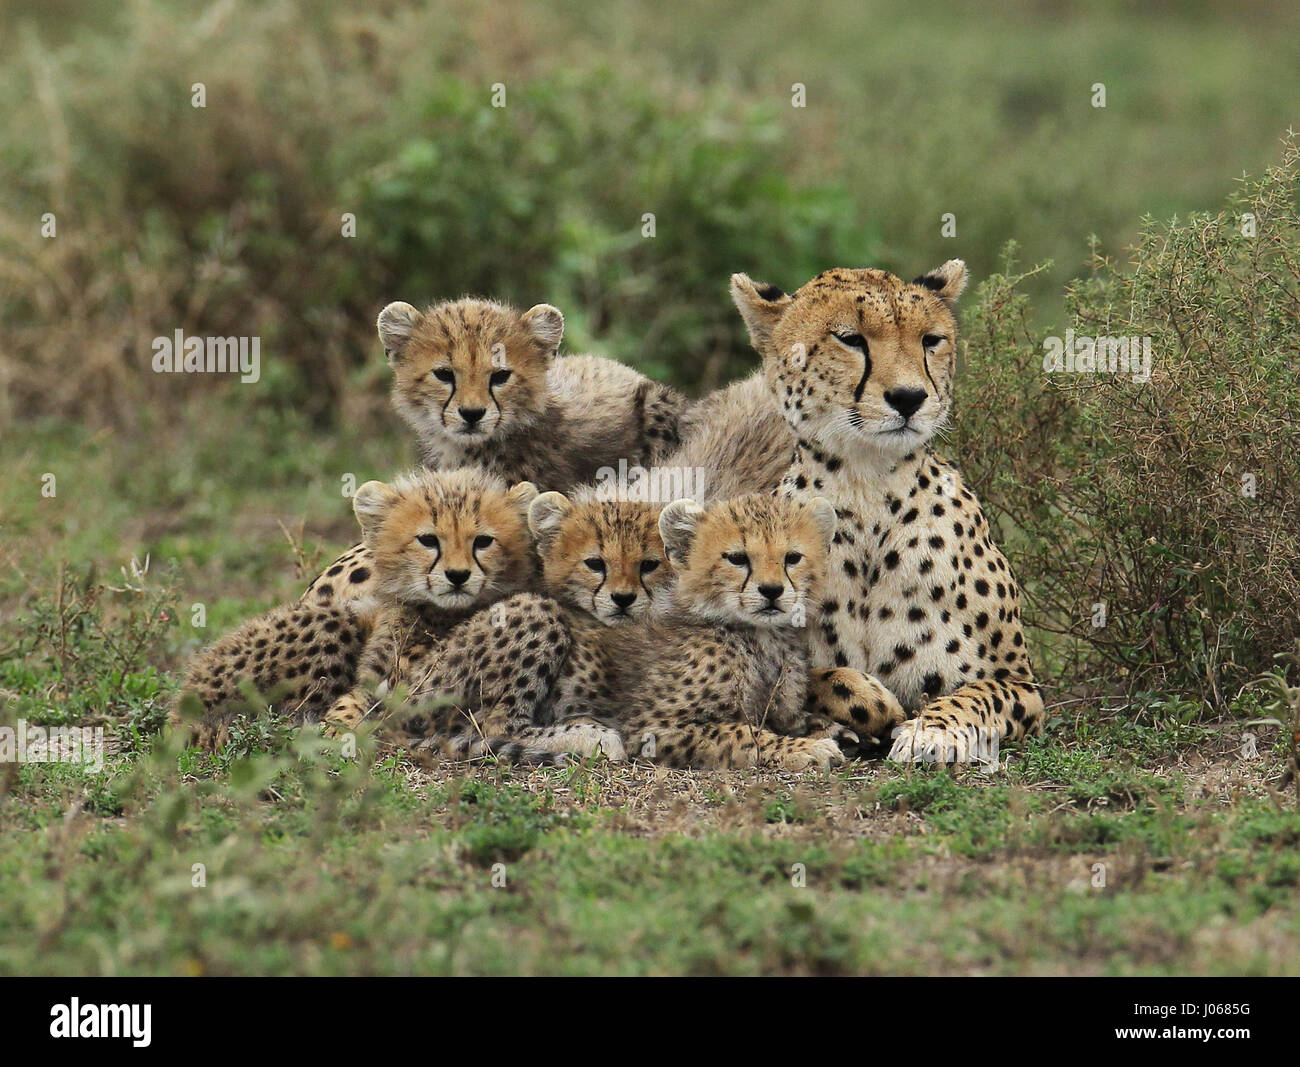 TANZANIA, AFRICA: HEARTMELTING pictures of cute cheetah cubs using their mum’s back as a launching platform for their aerial antics have been captured. Another adorable shot looks as though the photographer has composed the wild family together ready for a picture perfect family portrait.  Other images show the, all too cute, spotty cubs clambering over their mummy, play-fighting together, going on patrol as well as stopping for a quick feed. Photographer David Silverman (54) from Rhode Island, USA travelled to Tanzania, Africa to capture these enchanting snaps of a family spending quality tim Stock Photo